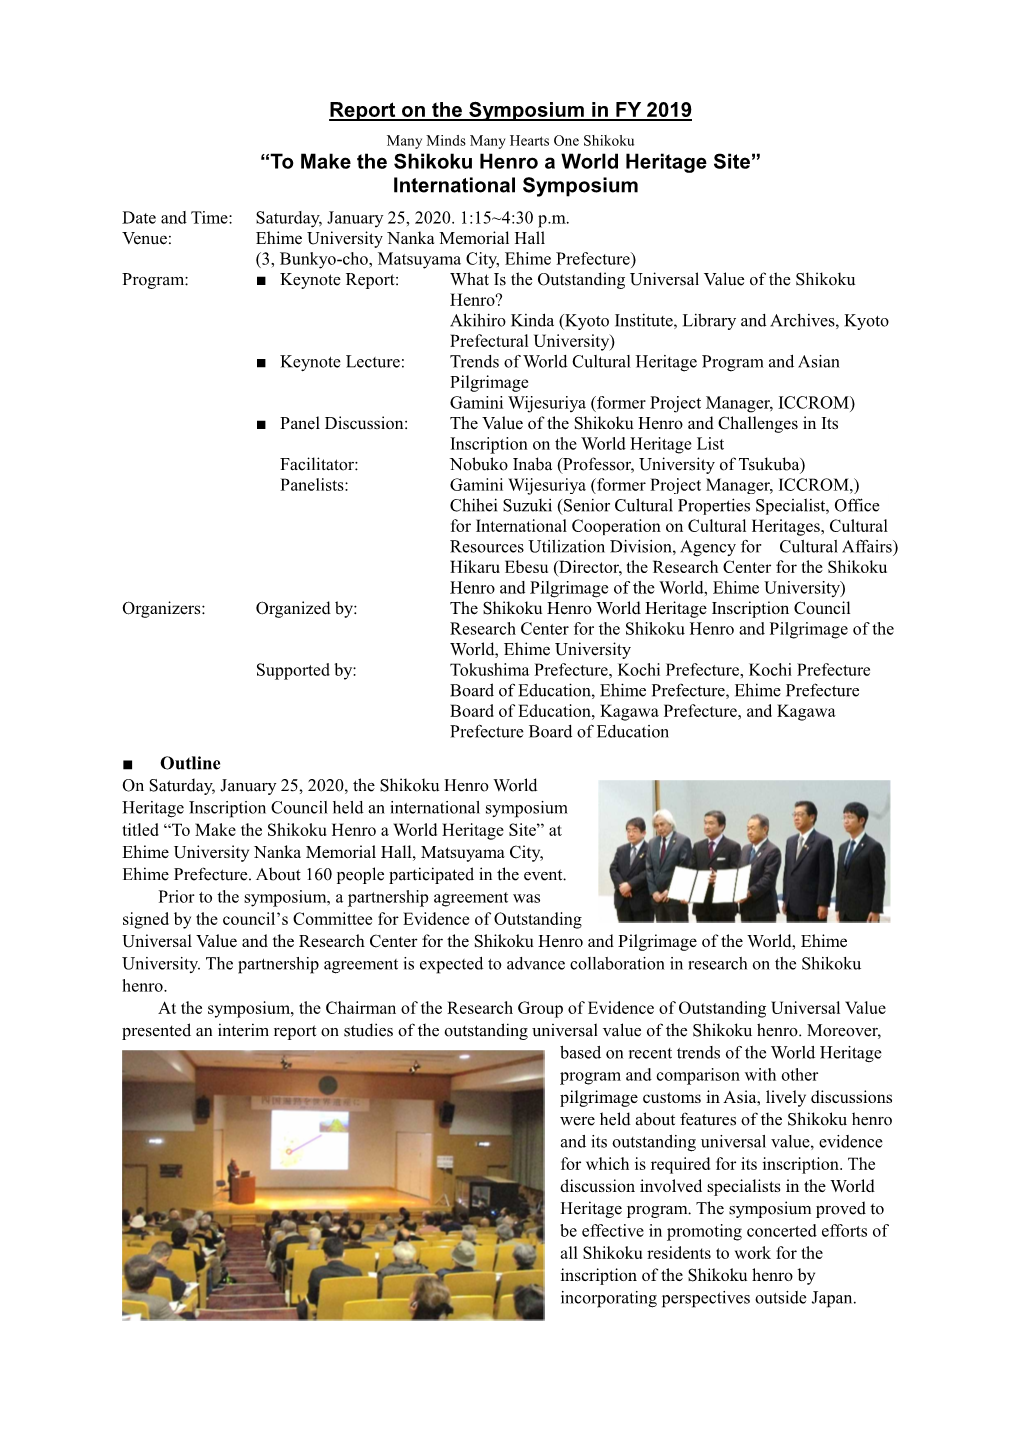 Report on the Symposium in FY 2019 “To Make the Shikoku Henro A